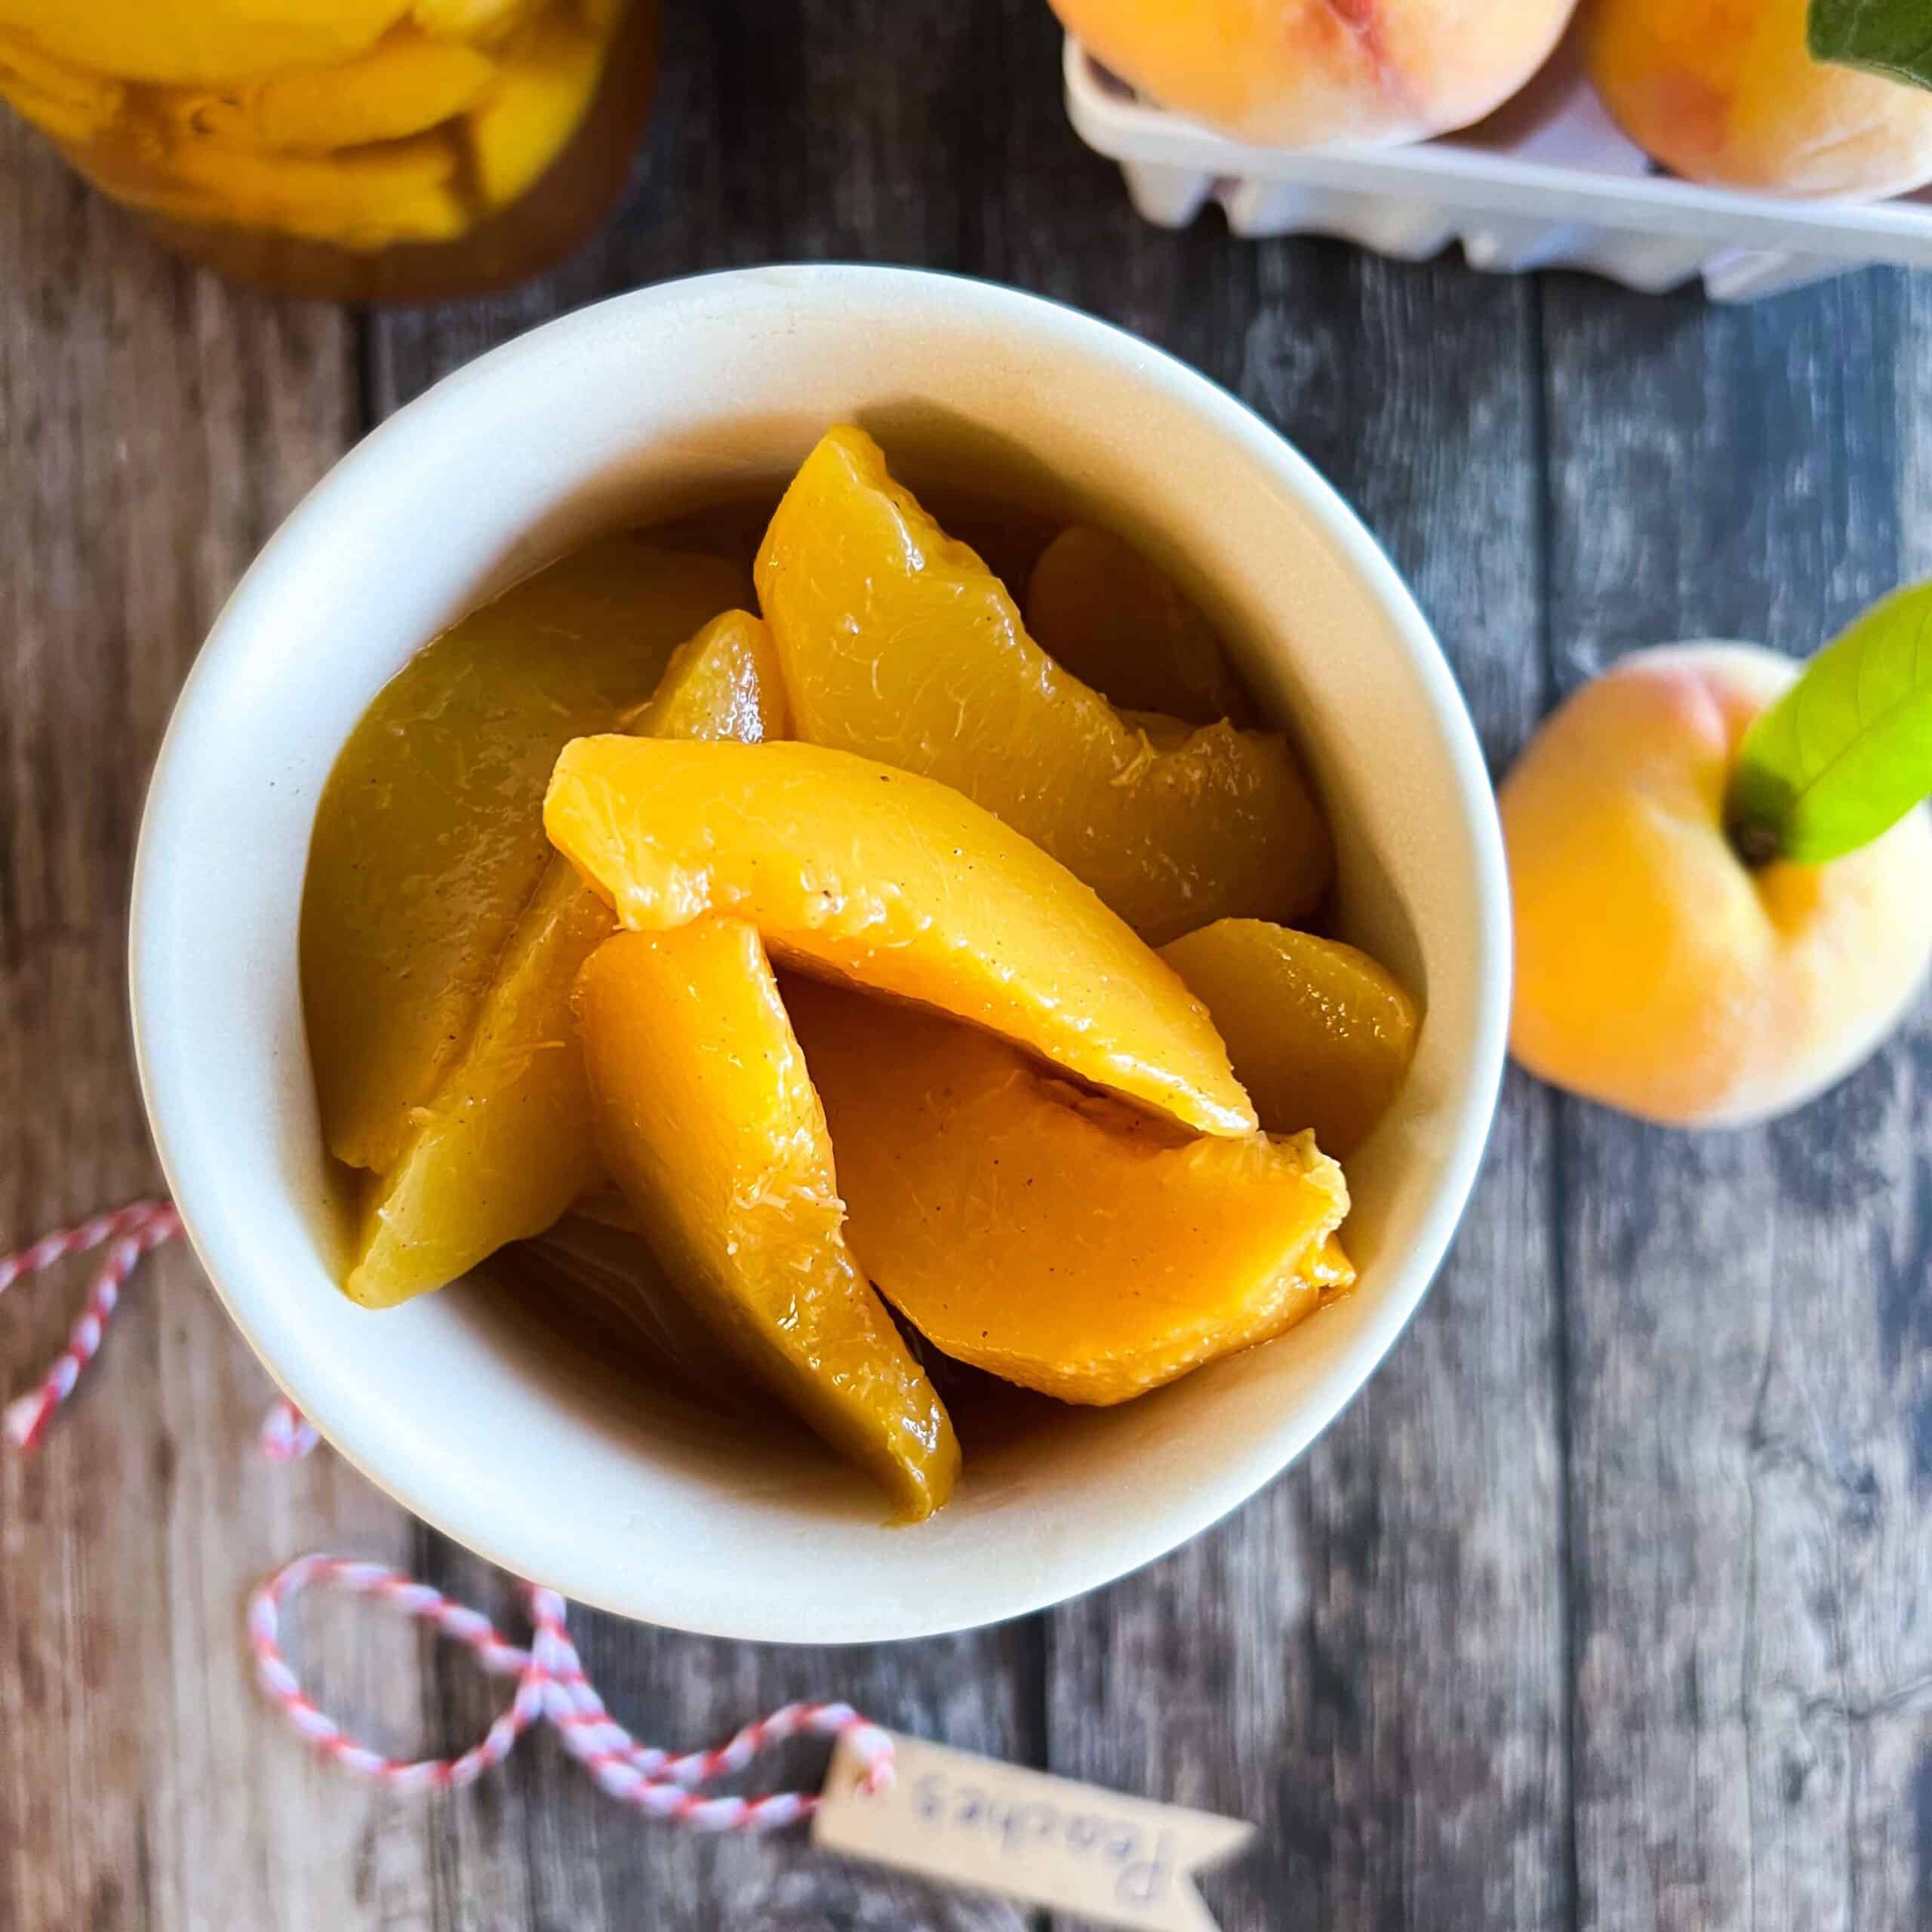 Spiced canned peaches with brown sugar in a cream bowl.